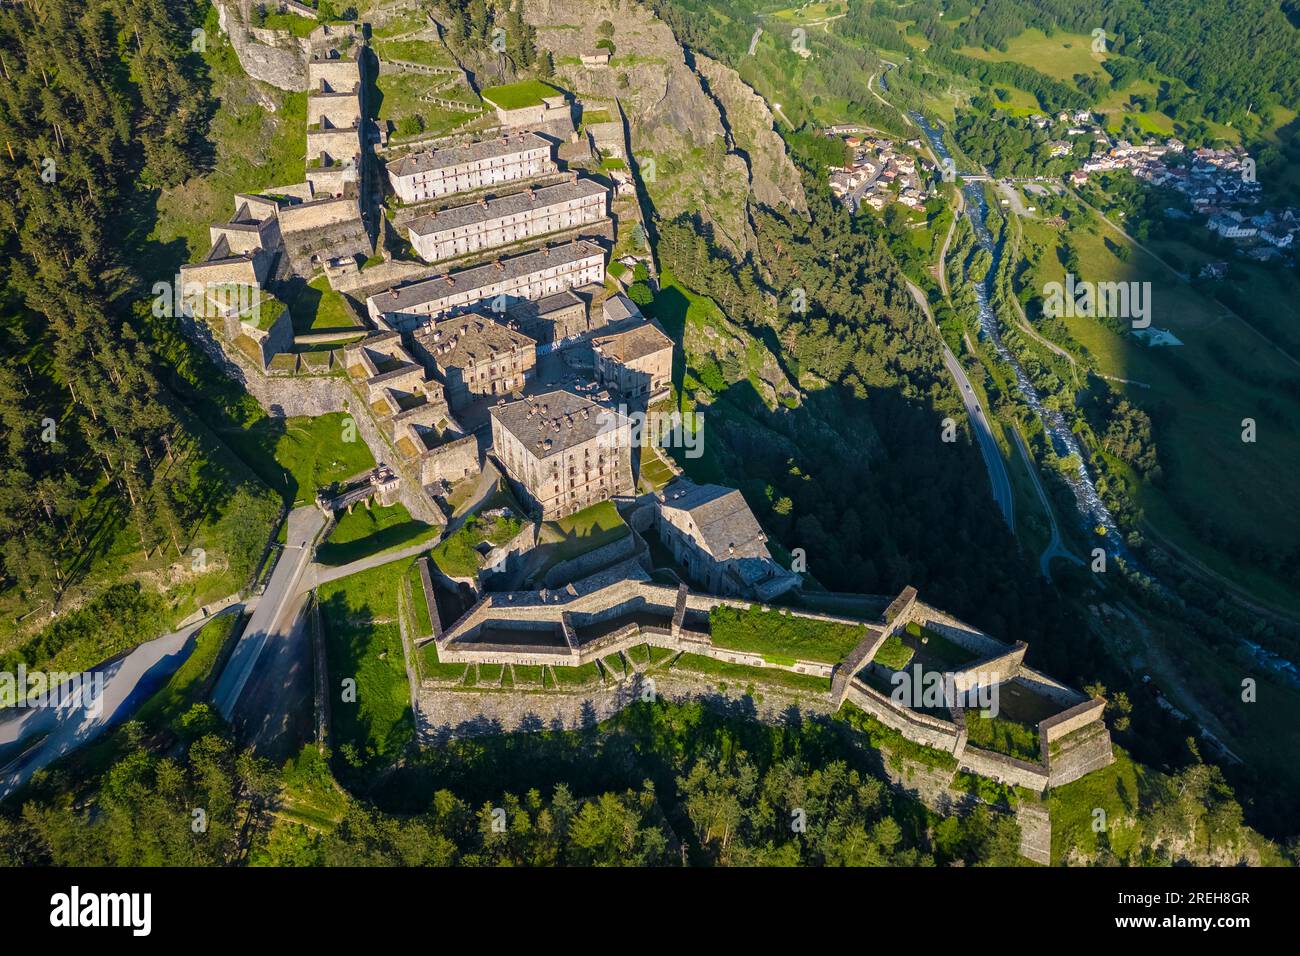 Aerial view of the Fenestrelle fortress watching over Chisone Valley. Orsiera Rocciavre Park, Chisone Valley, Turin, Piedmont, Italy. Stock Photo